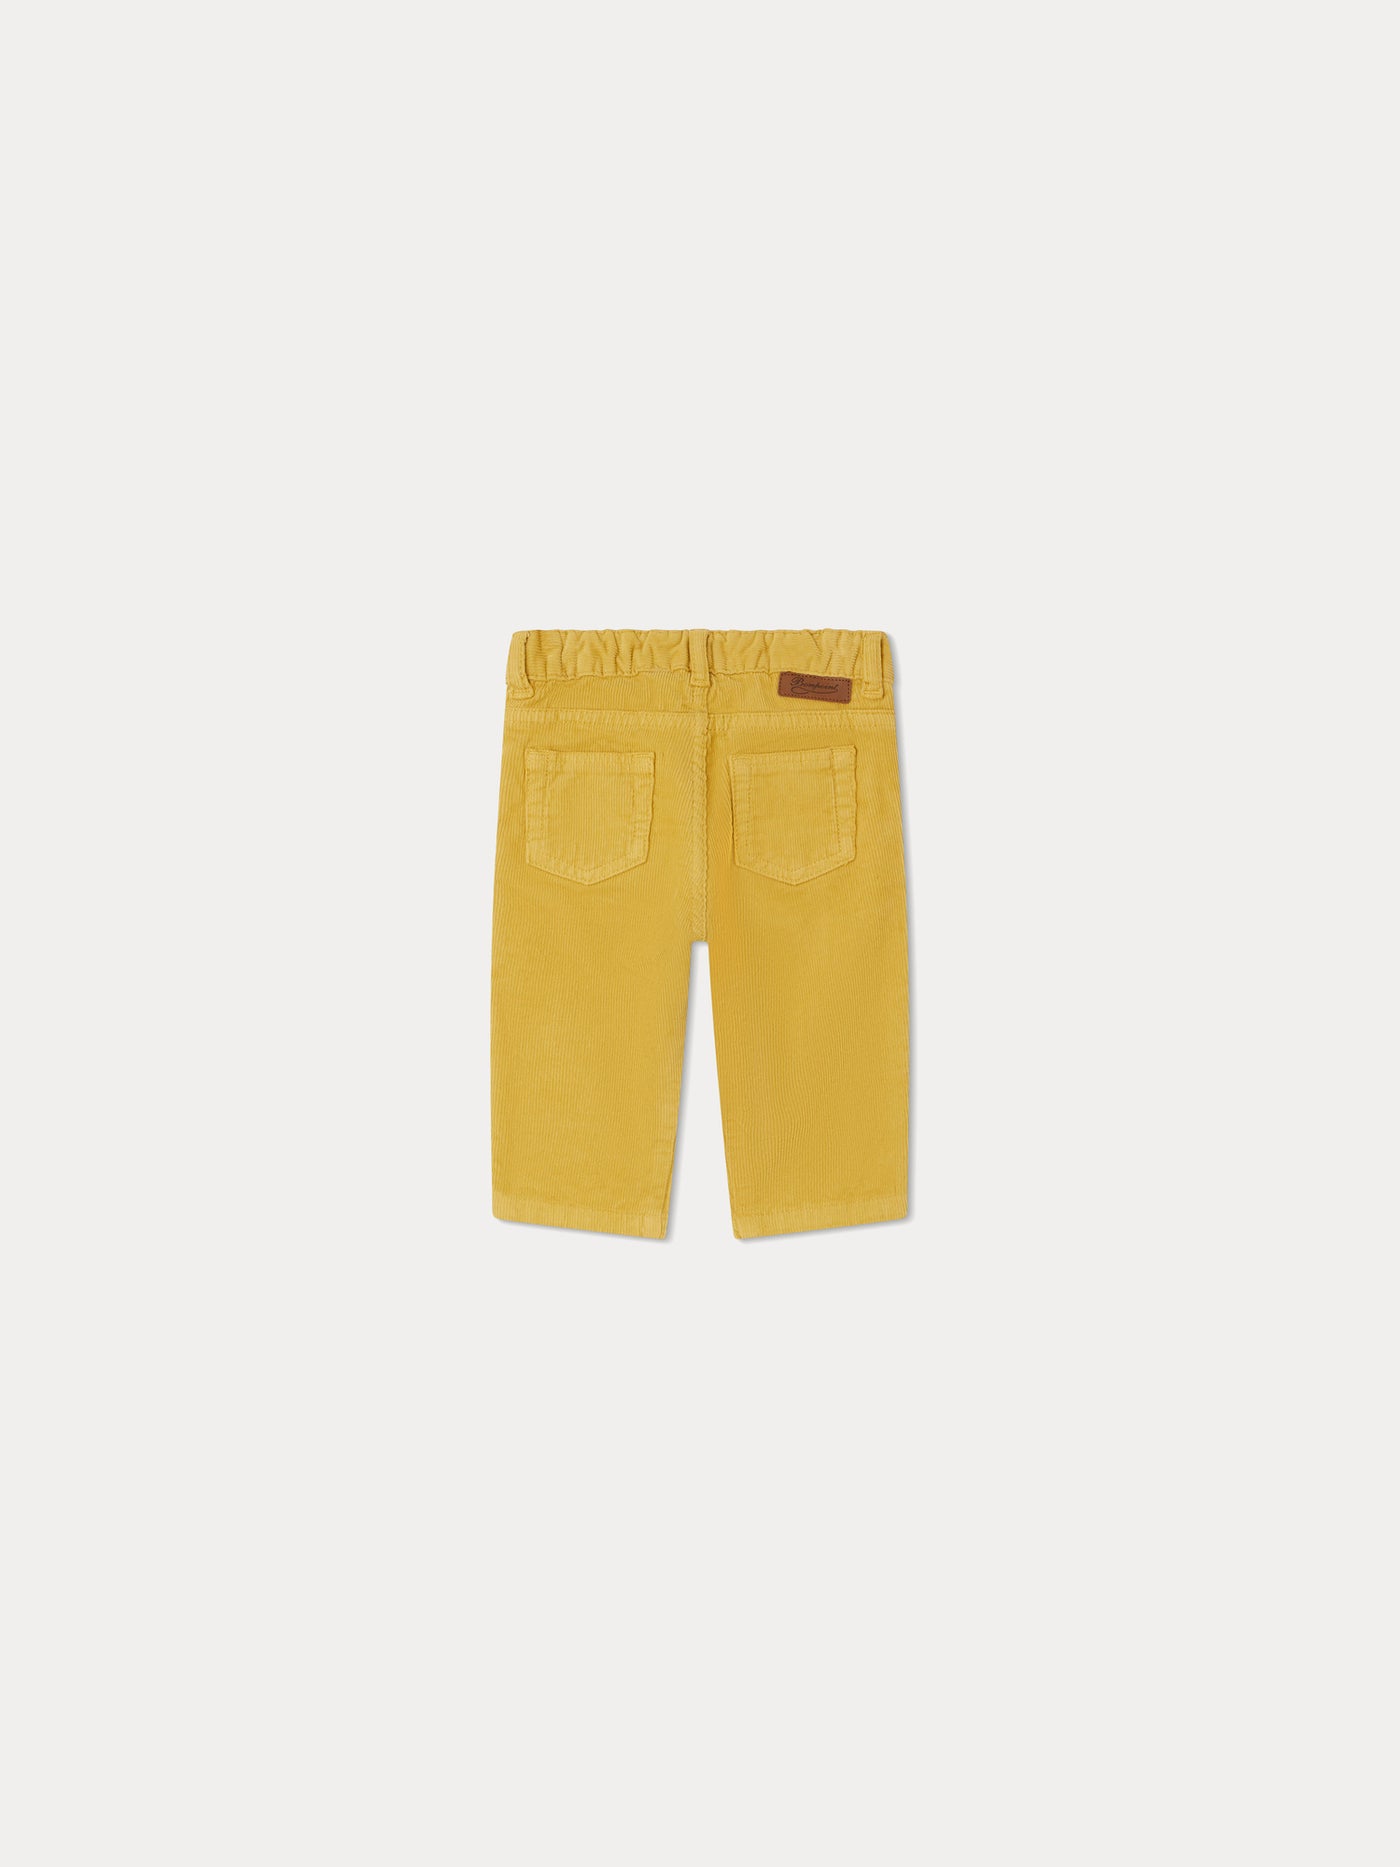 Cookie Pants buttercup yellow